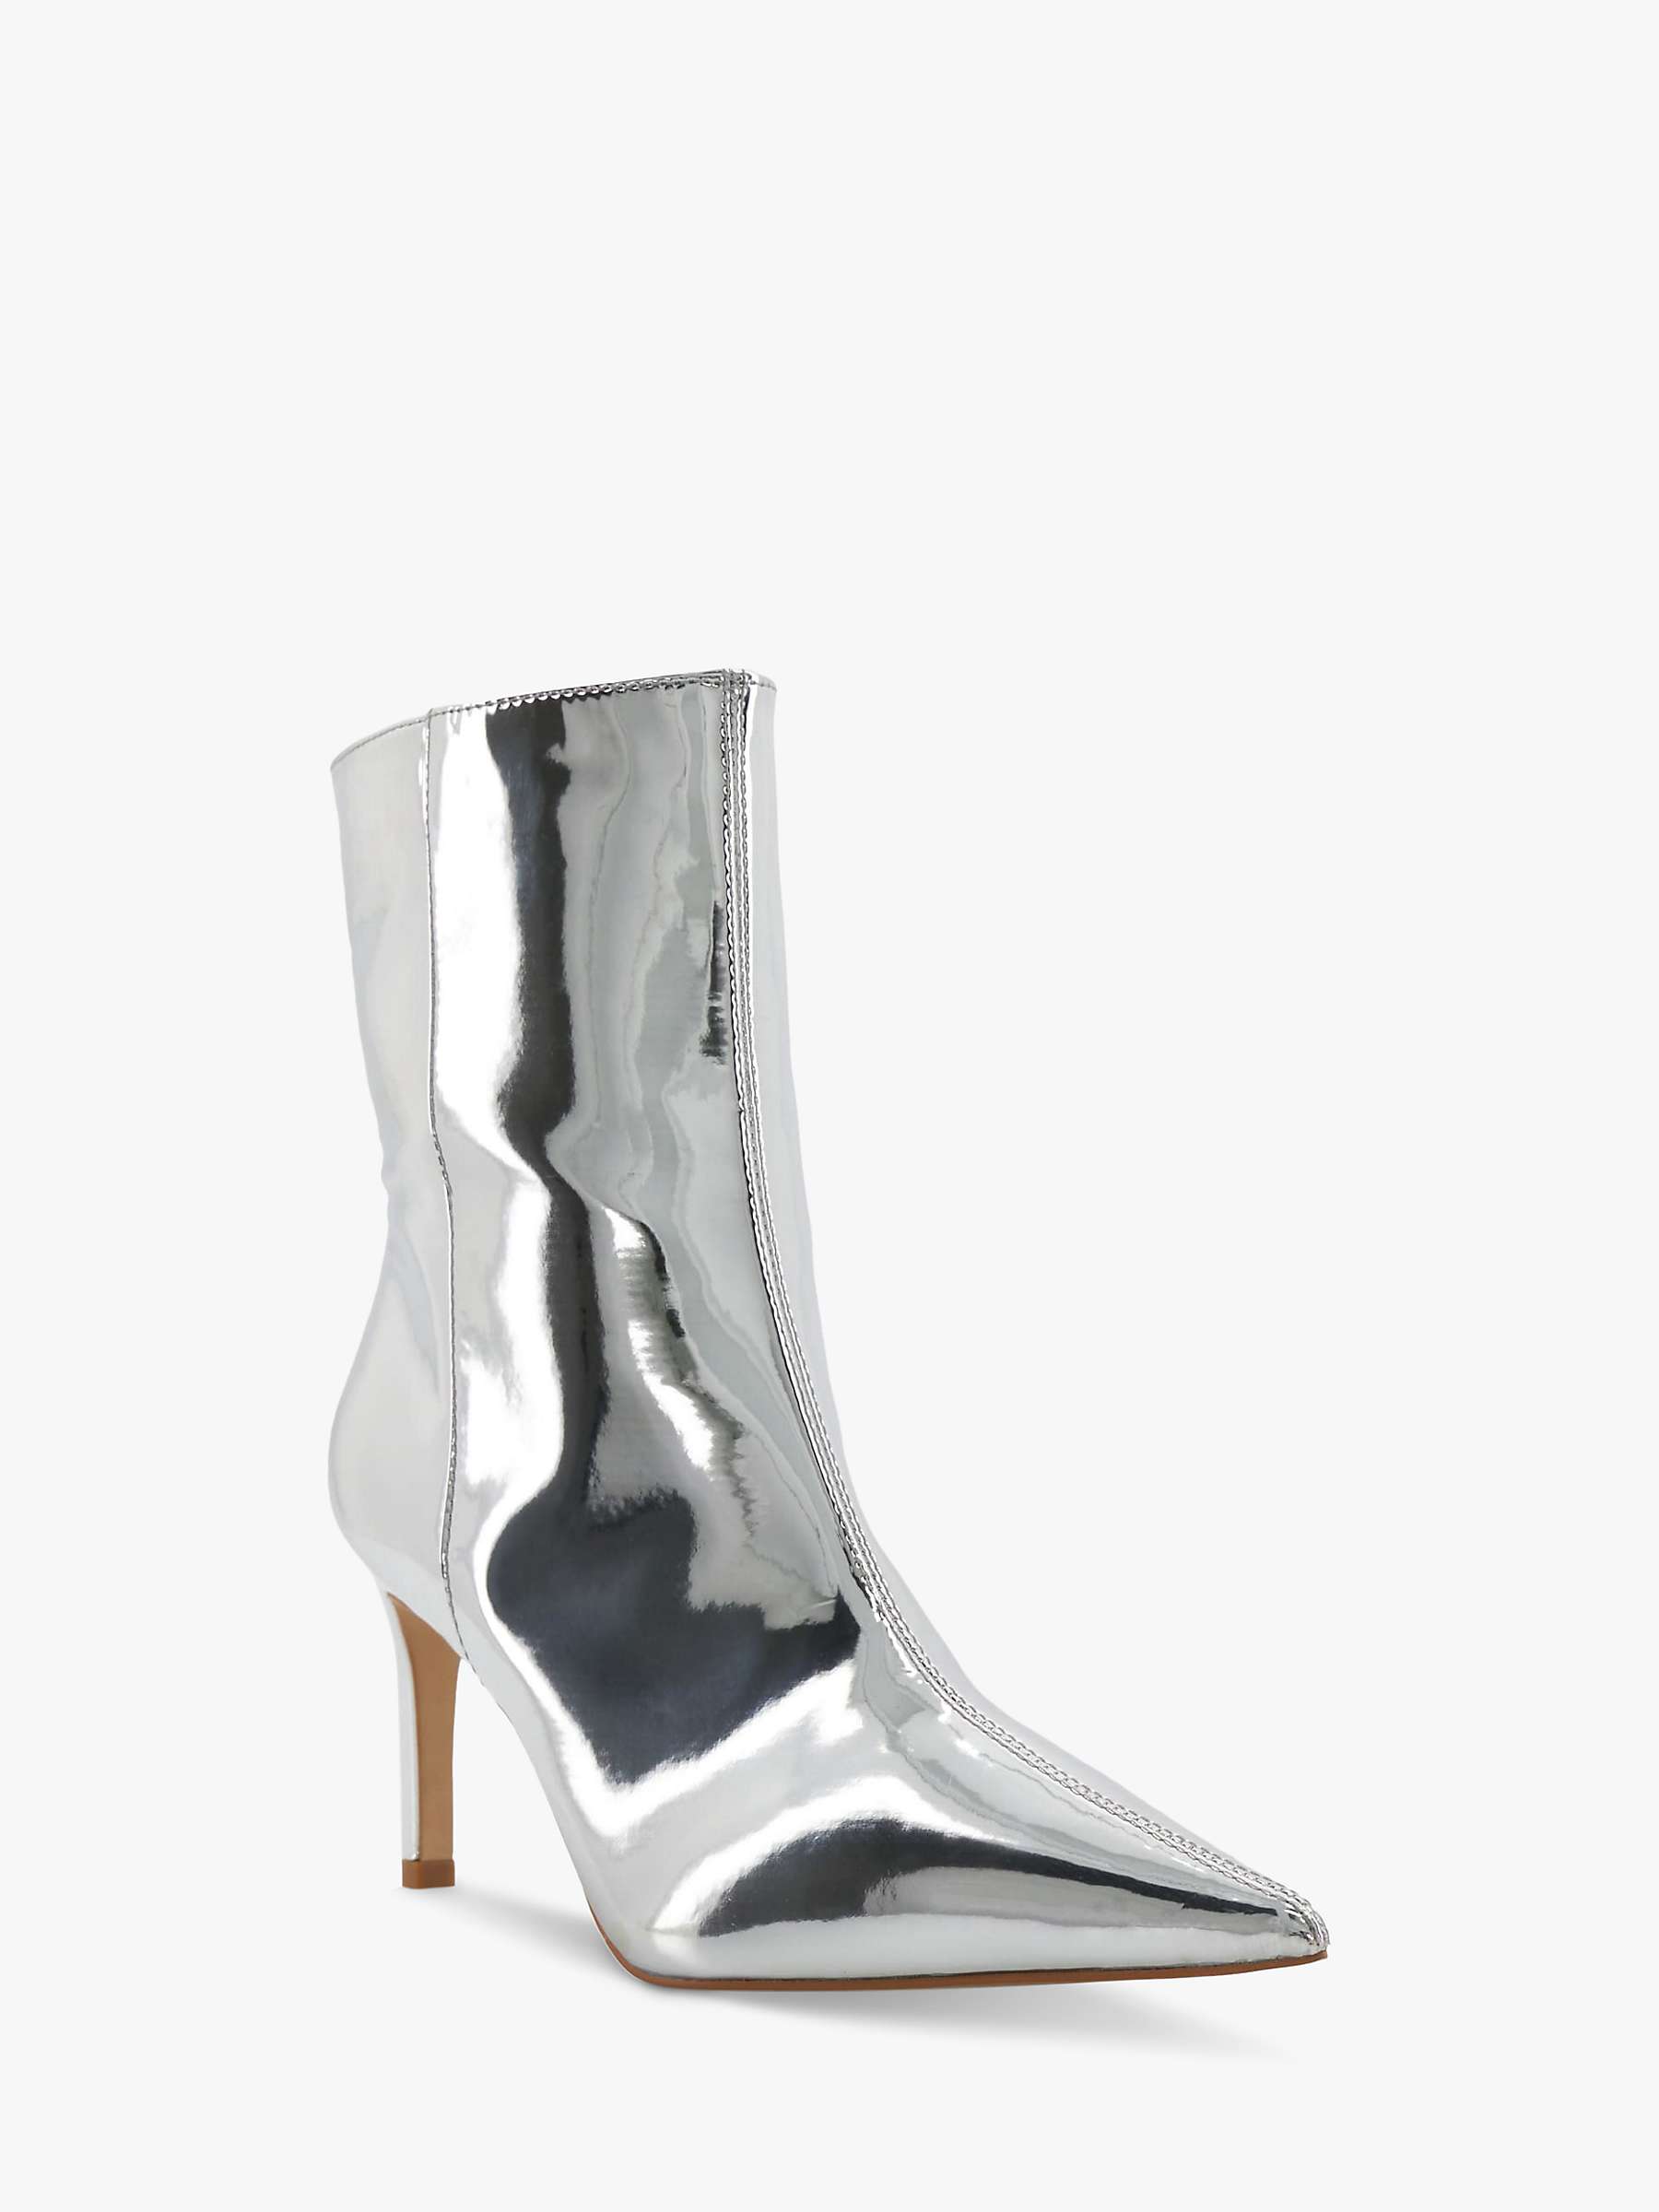 Buy Dune Olexi Pointed Stiletto Boots, Silver Online at johnlewis.com